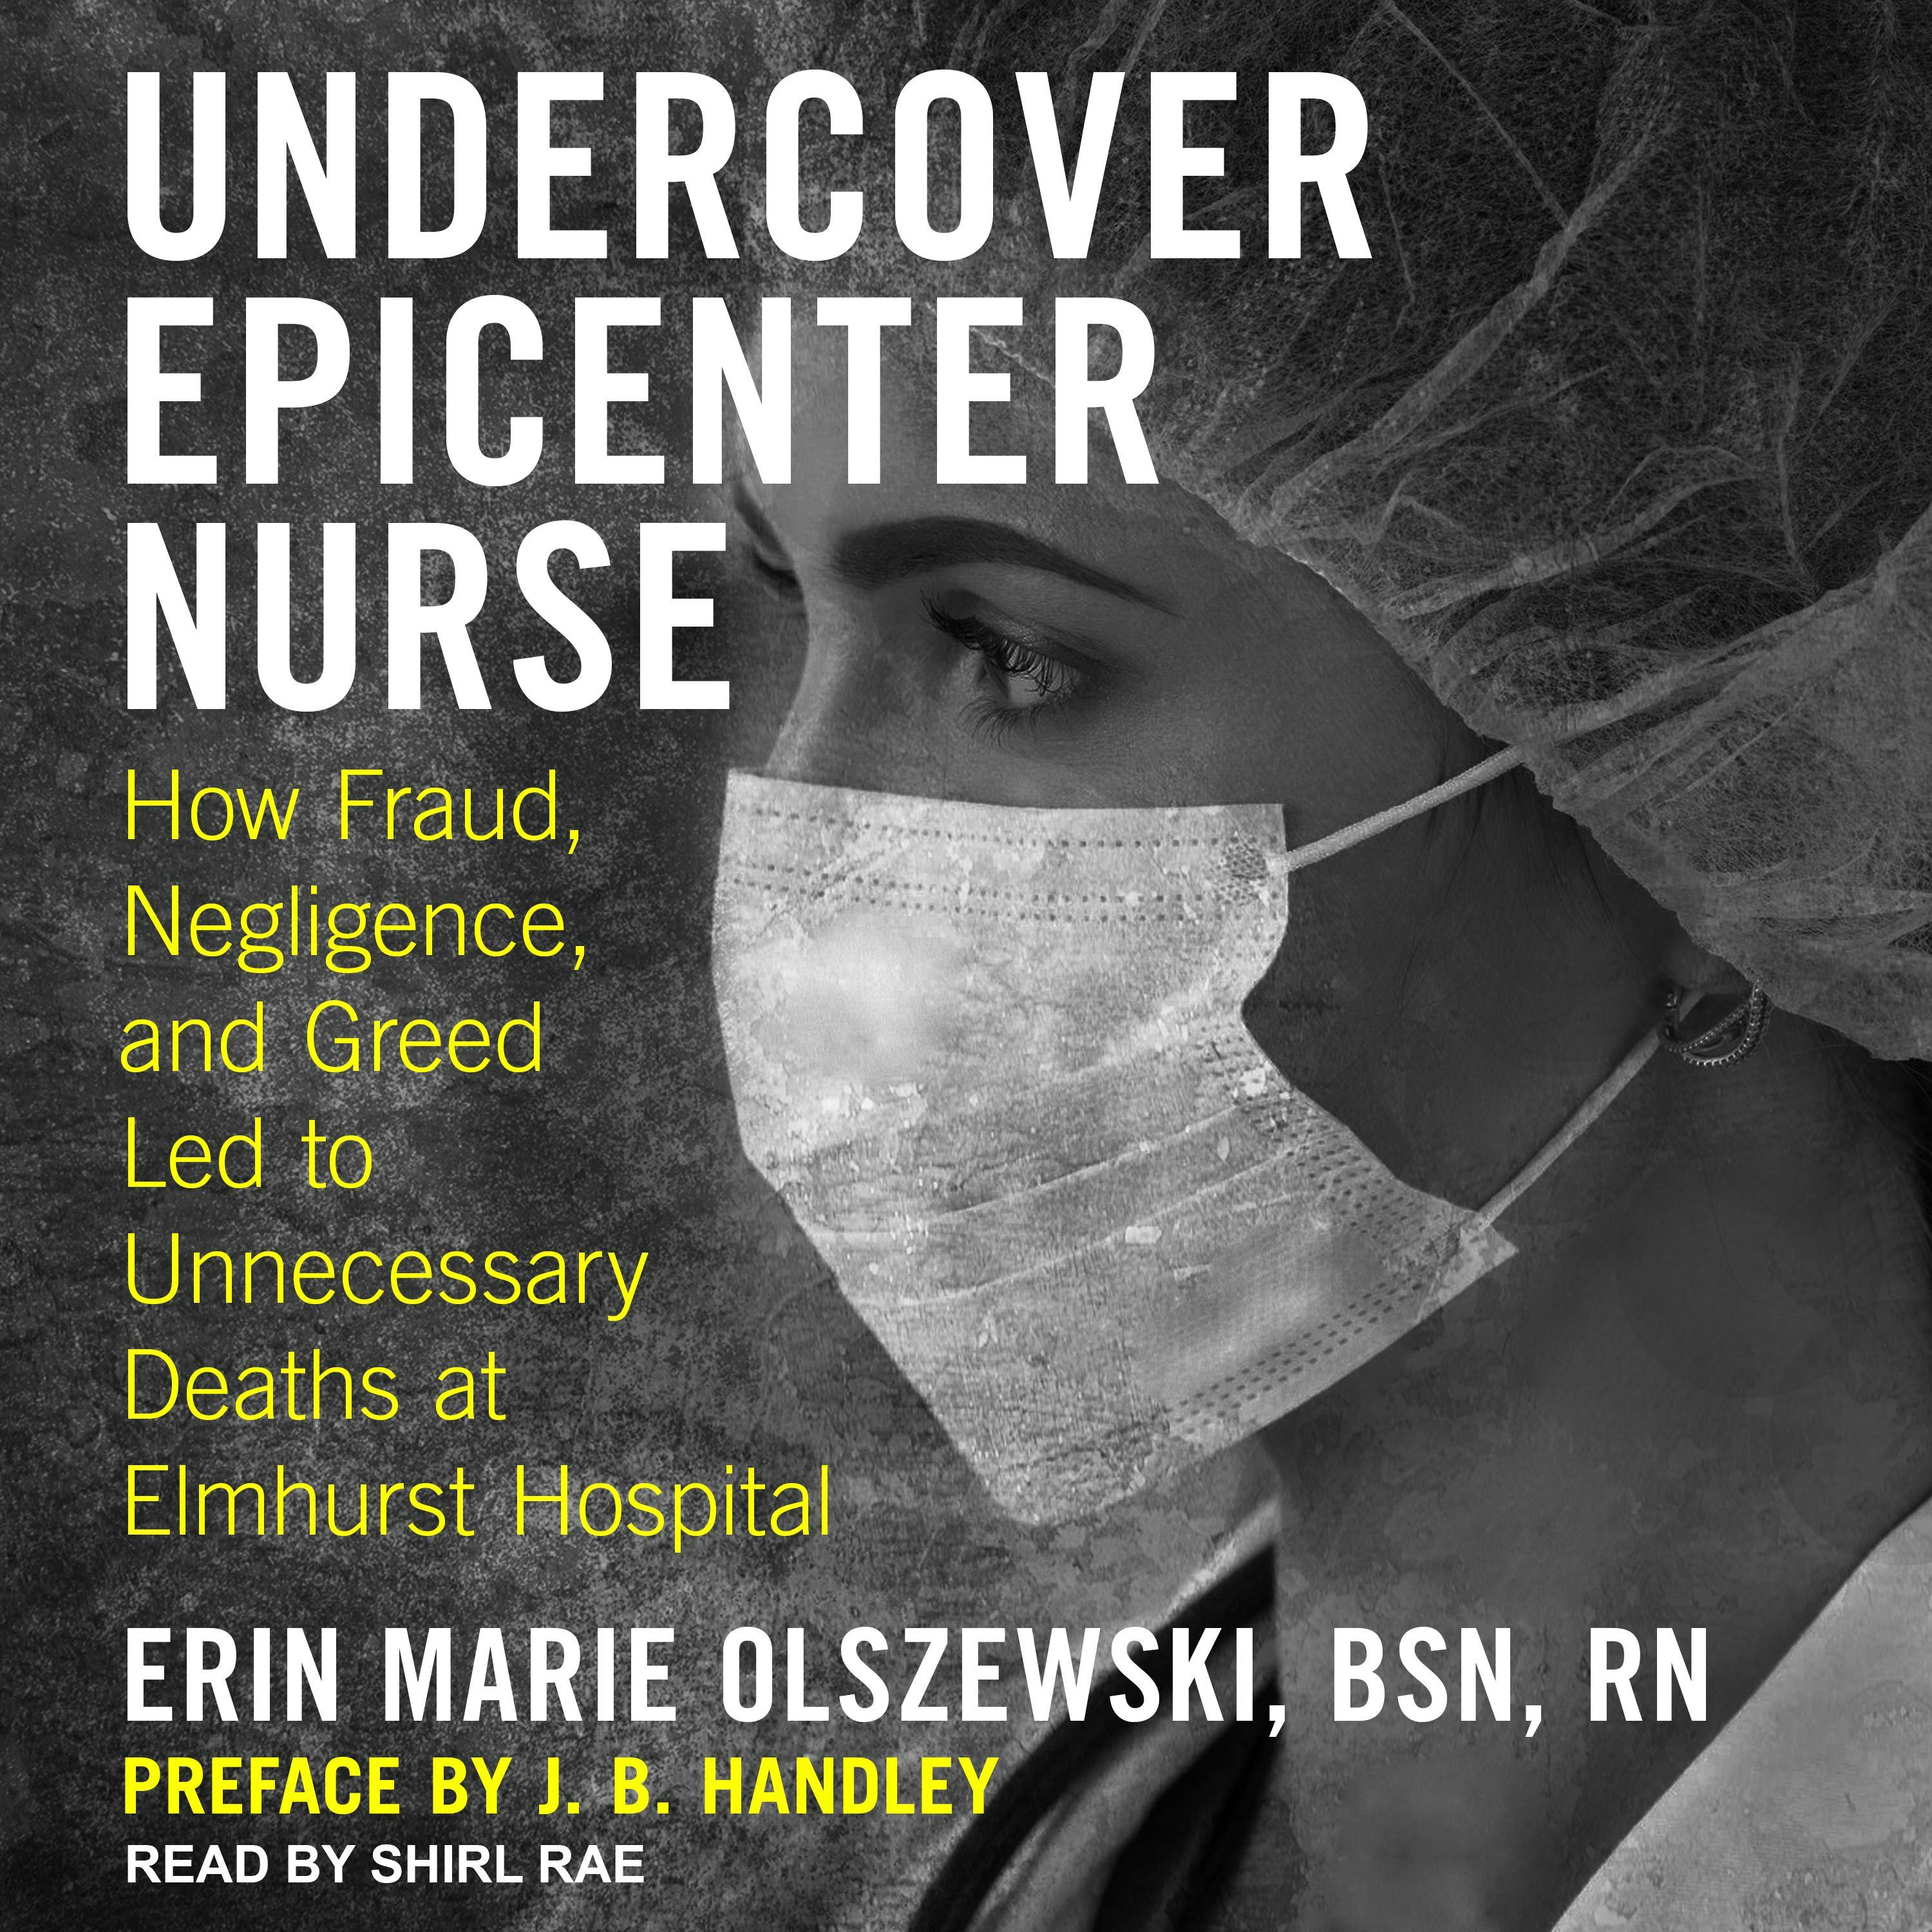 Undercover Epicenter Nurse: How Fraud, Negligence, and Greed Led to Unnecessary Deaths at Elmhurst Hospital - undefined